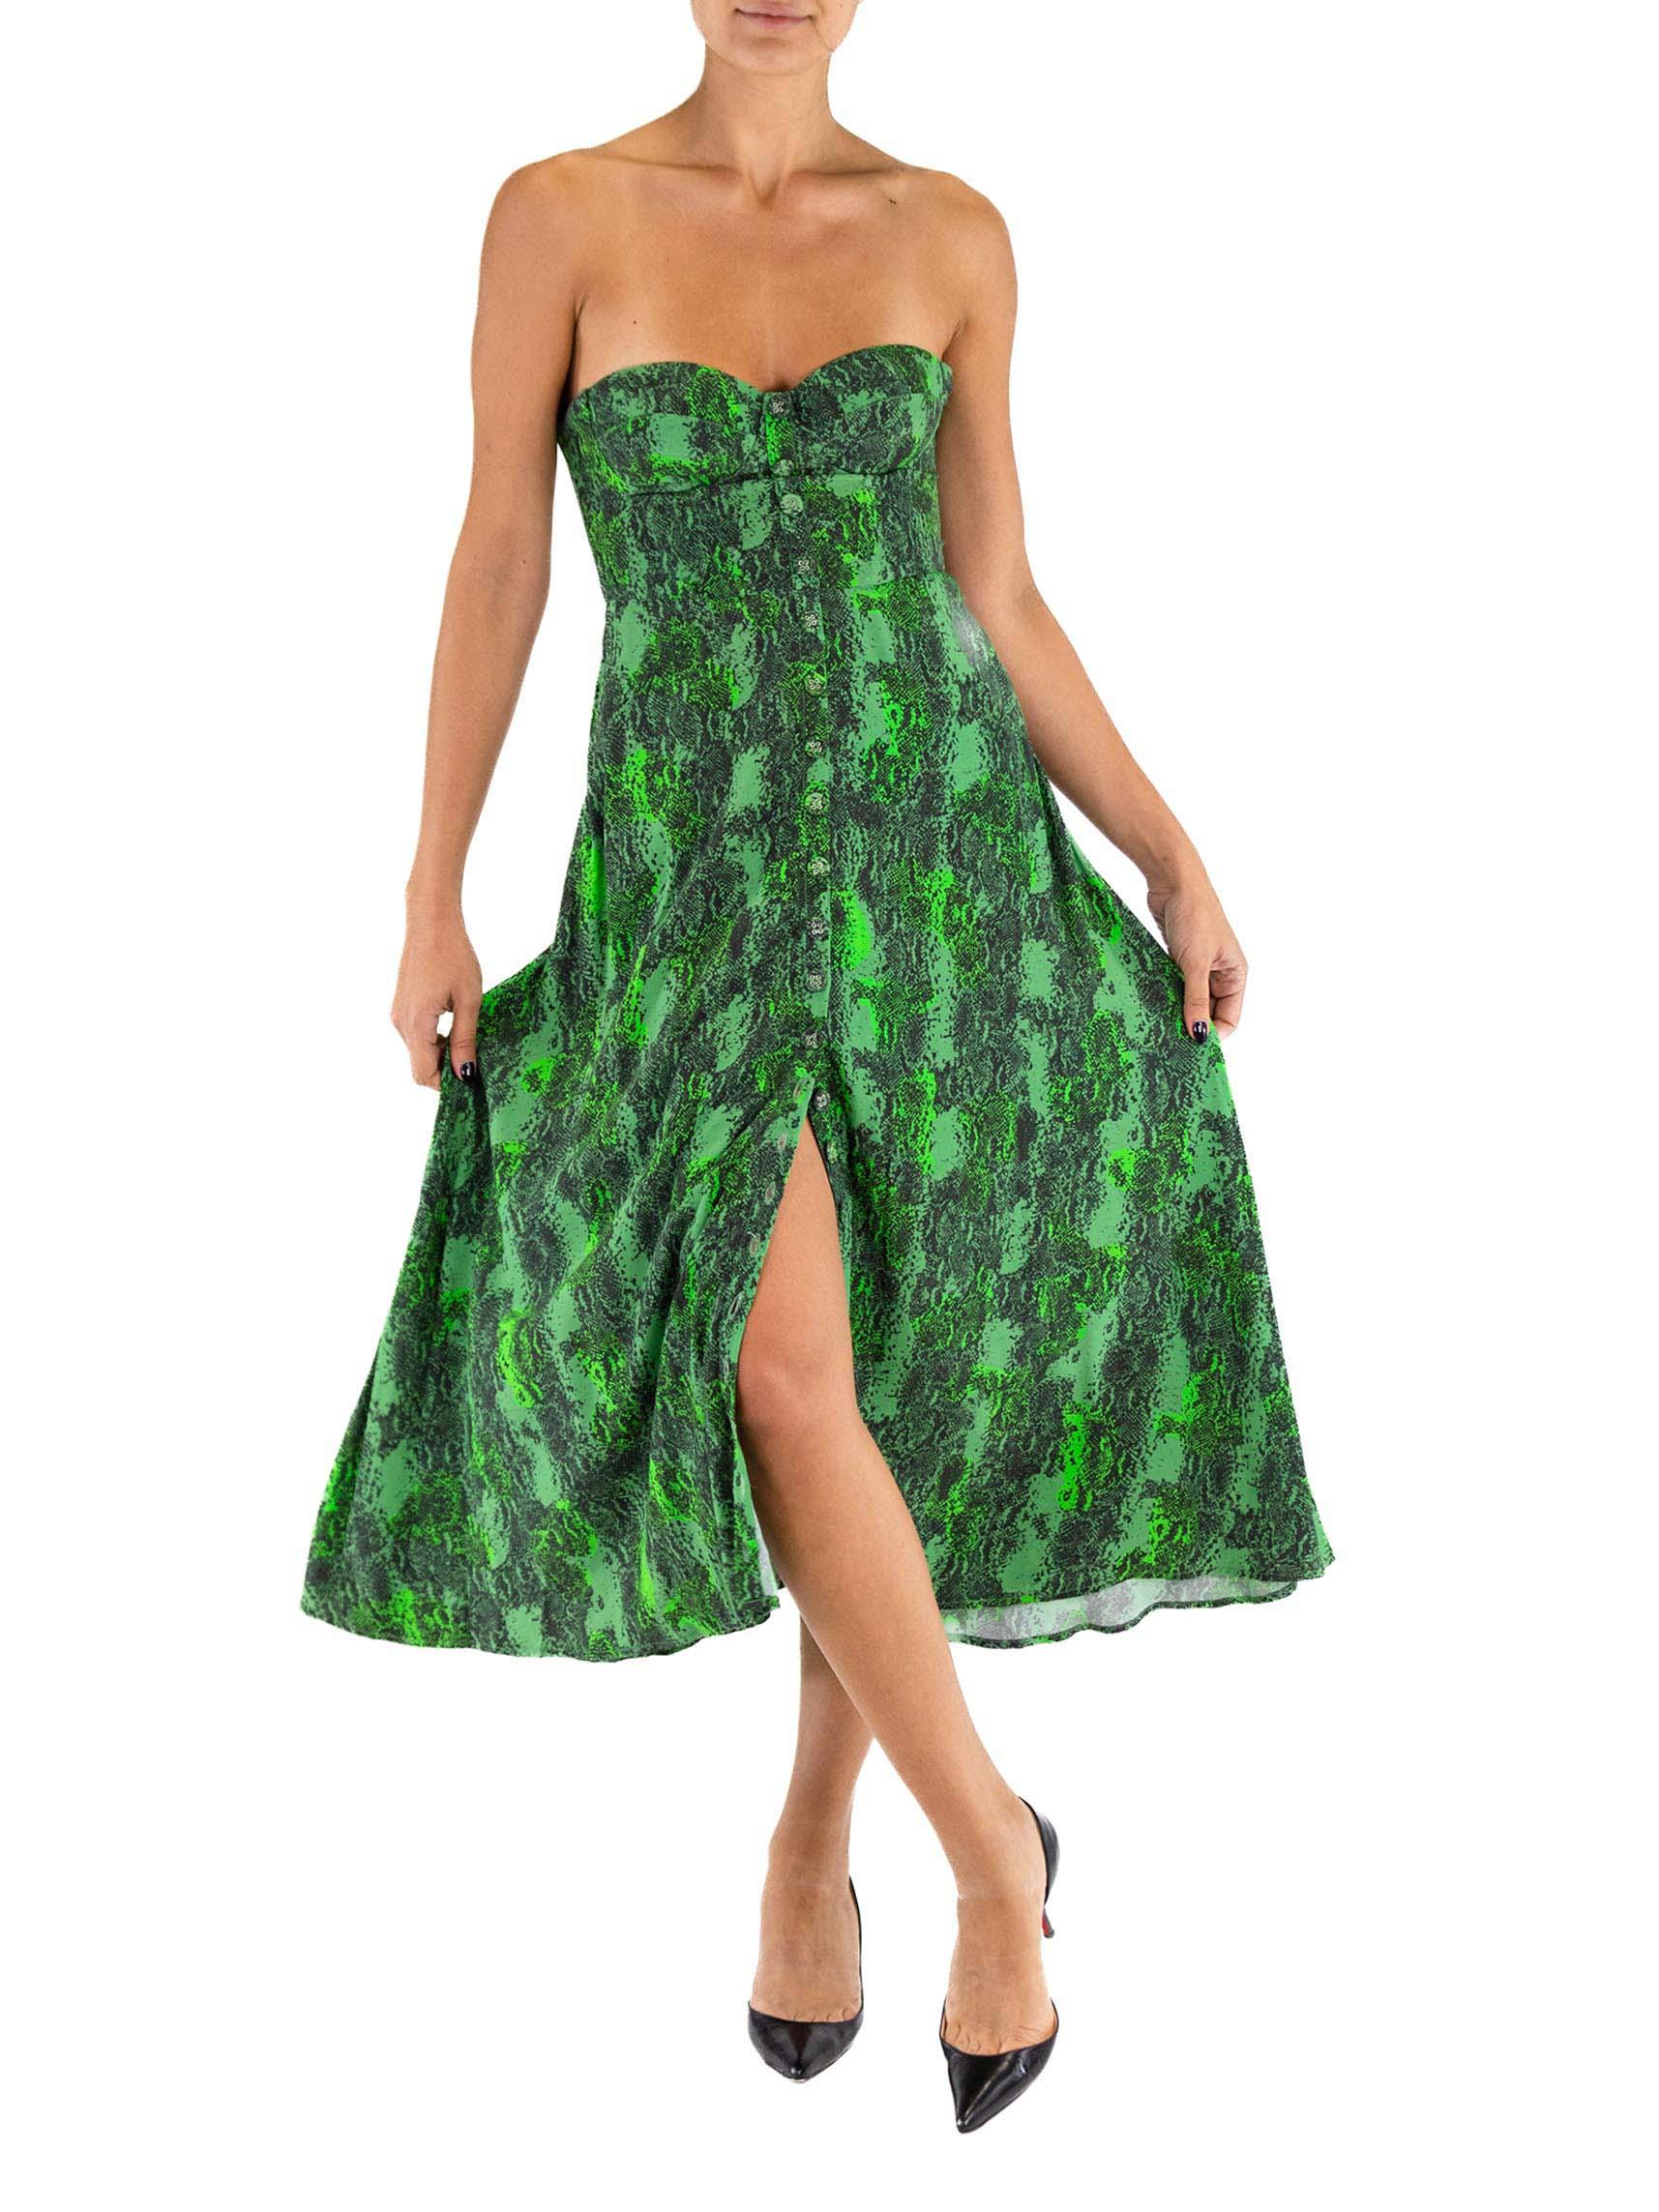 1990S ROTATE Green Rayon  Snake Print Strapless Bustier Dress With Pockets For Sale 1